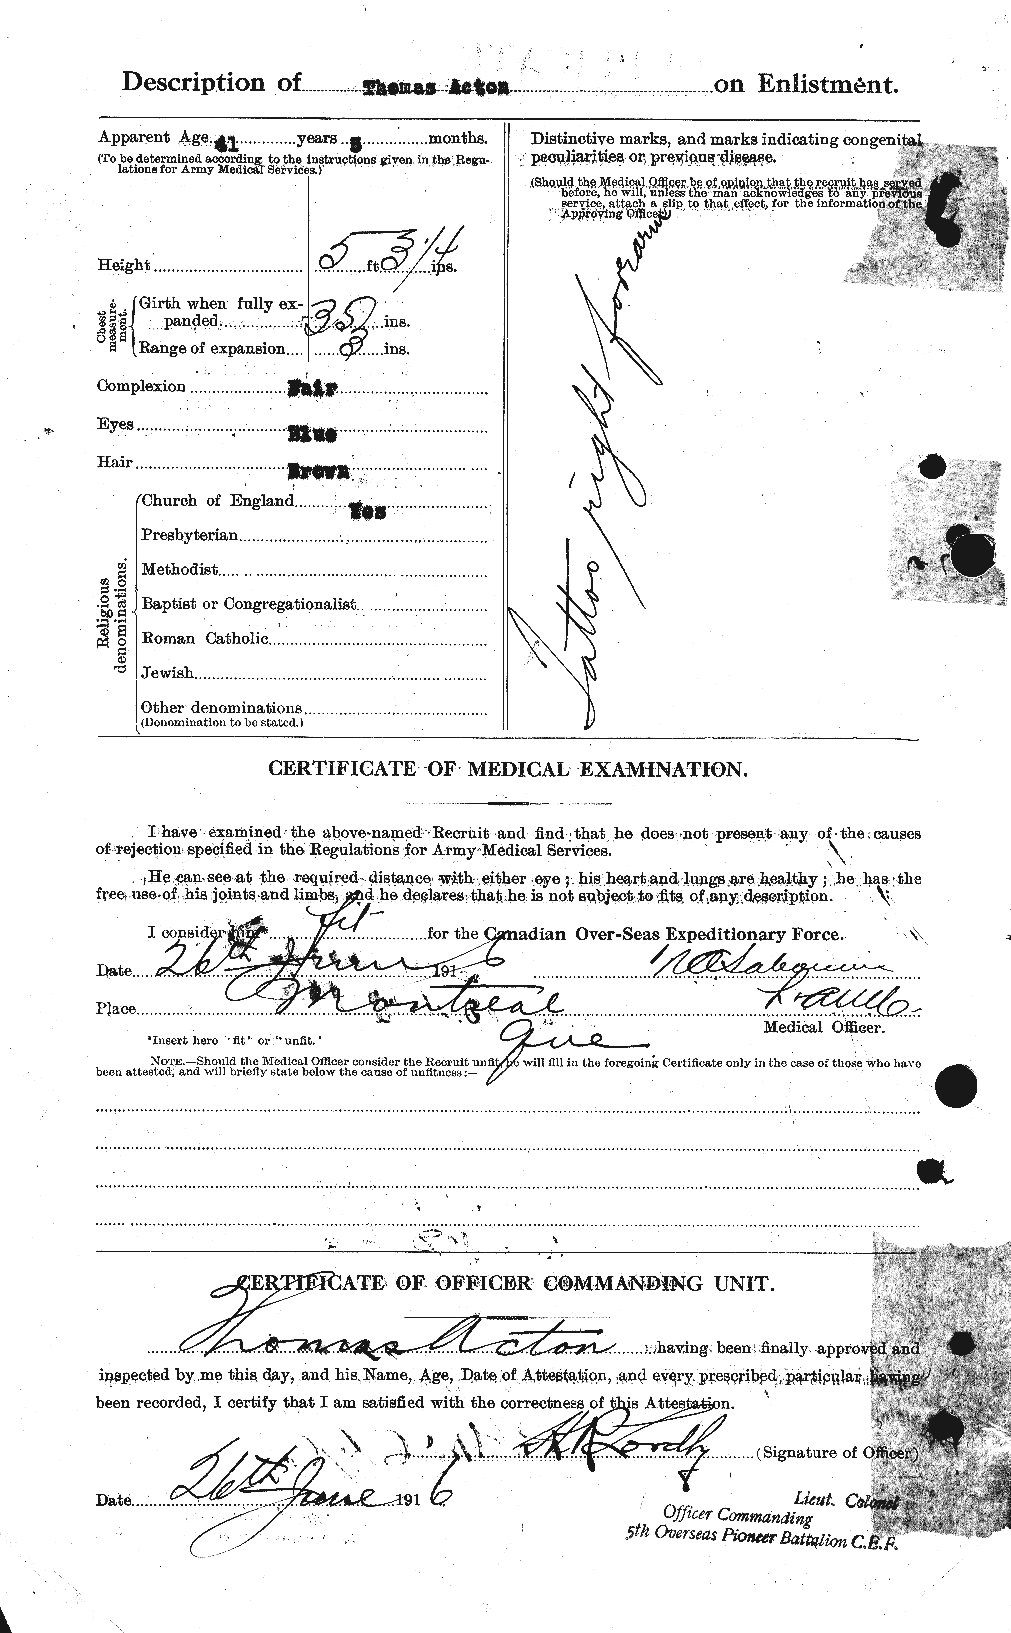 Personnel Records of the First World War - CEF 201037b